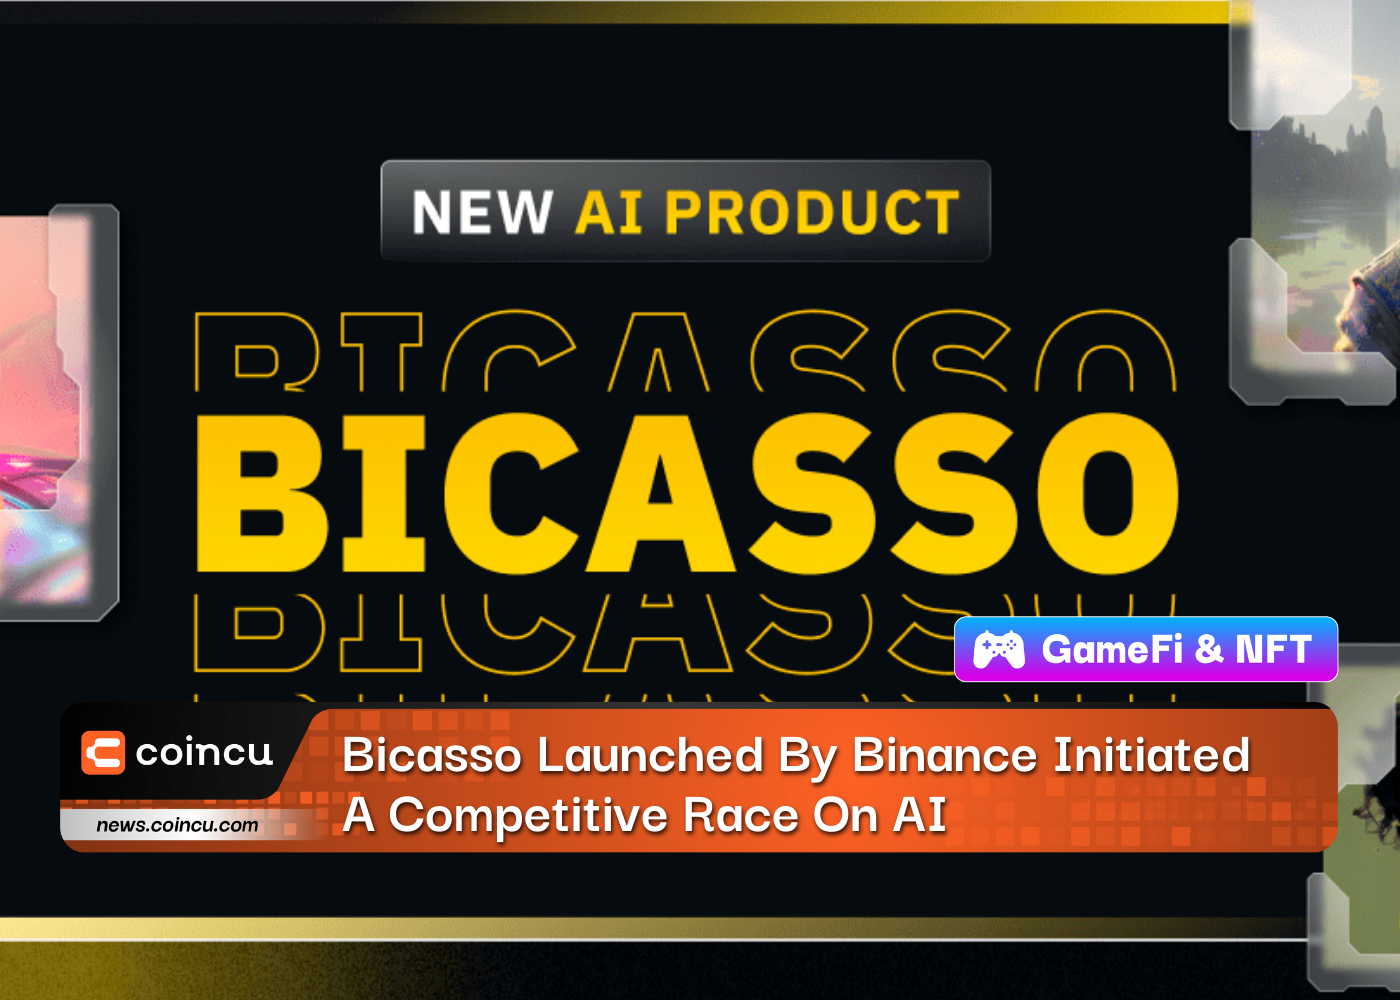 Bicasso Launched By Binance Initiated A Competitive Race On AI